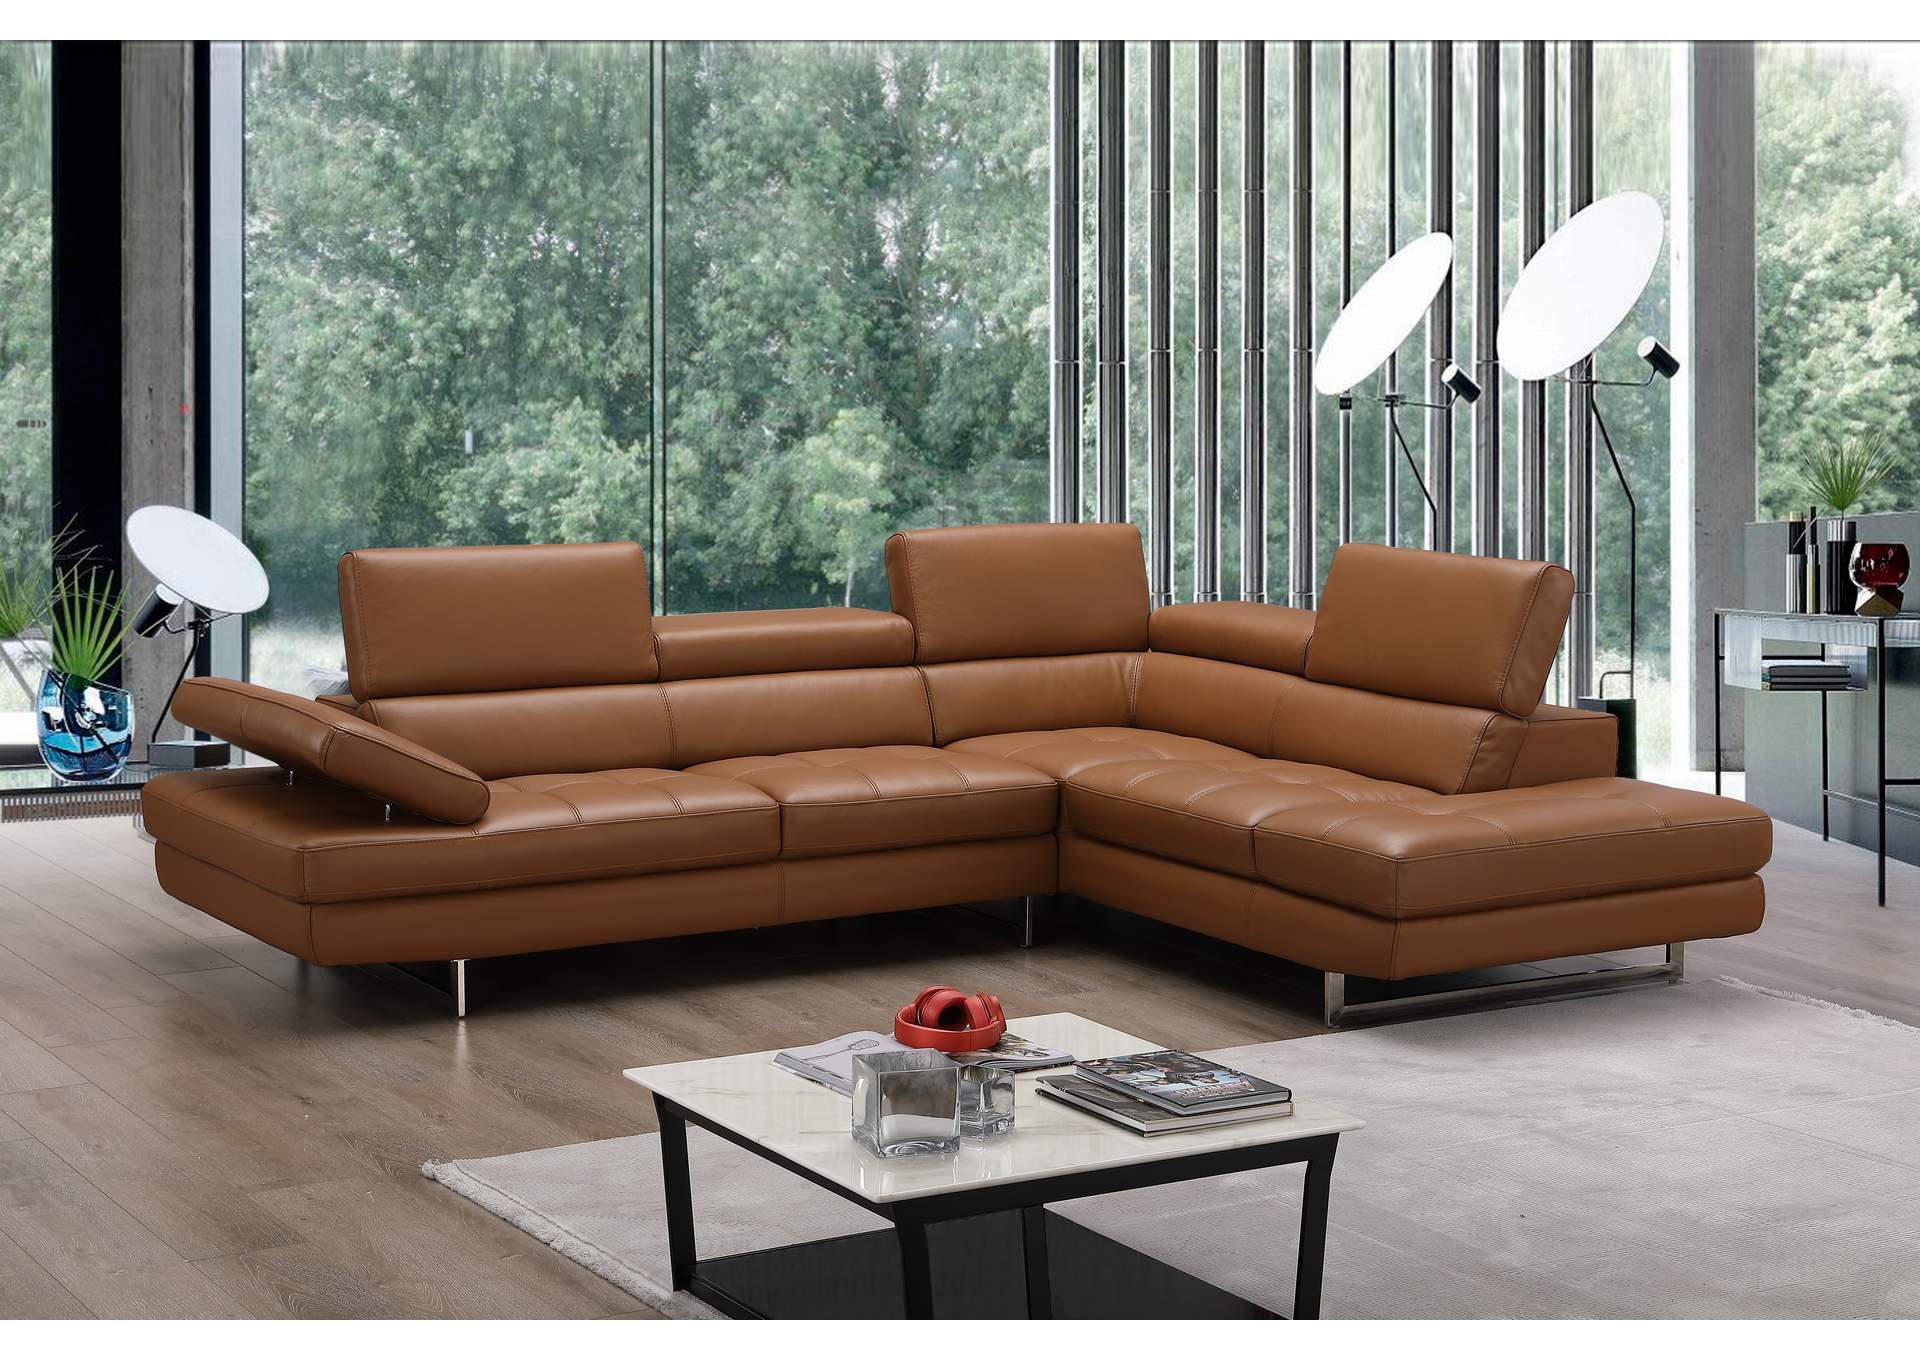 A761 Italian Leather Sectional Caramel In Right Hand Facing,J&M Furniture